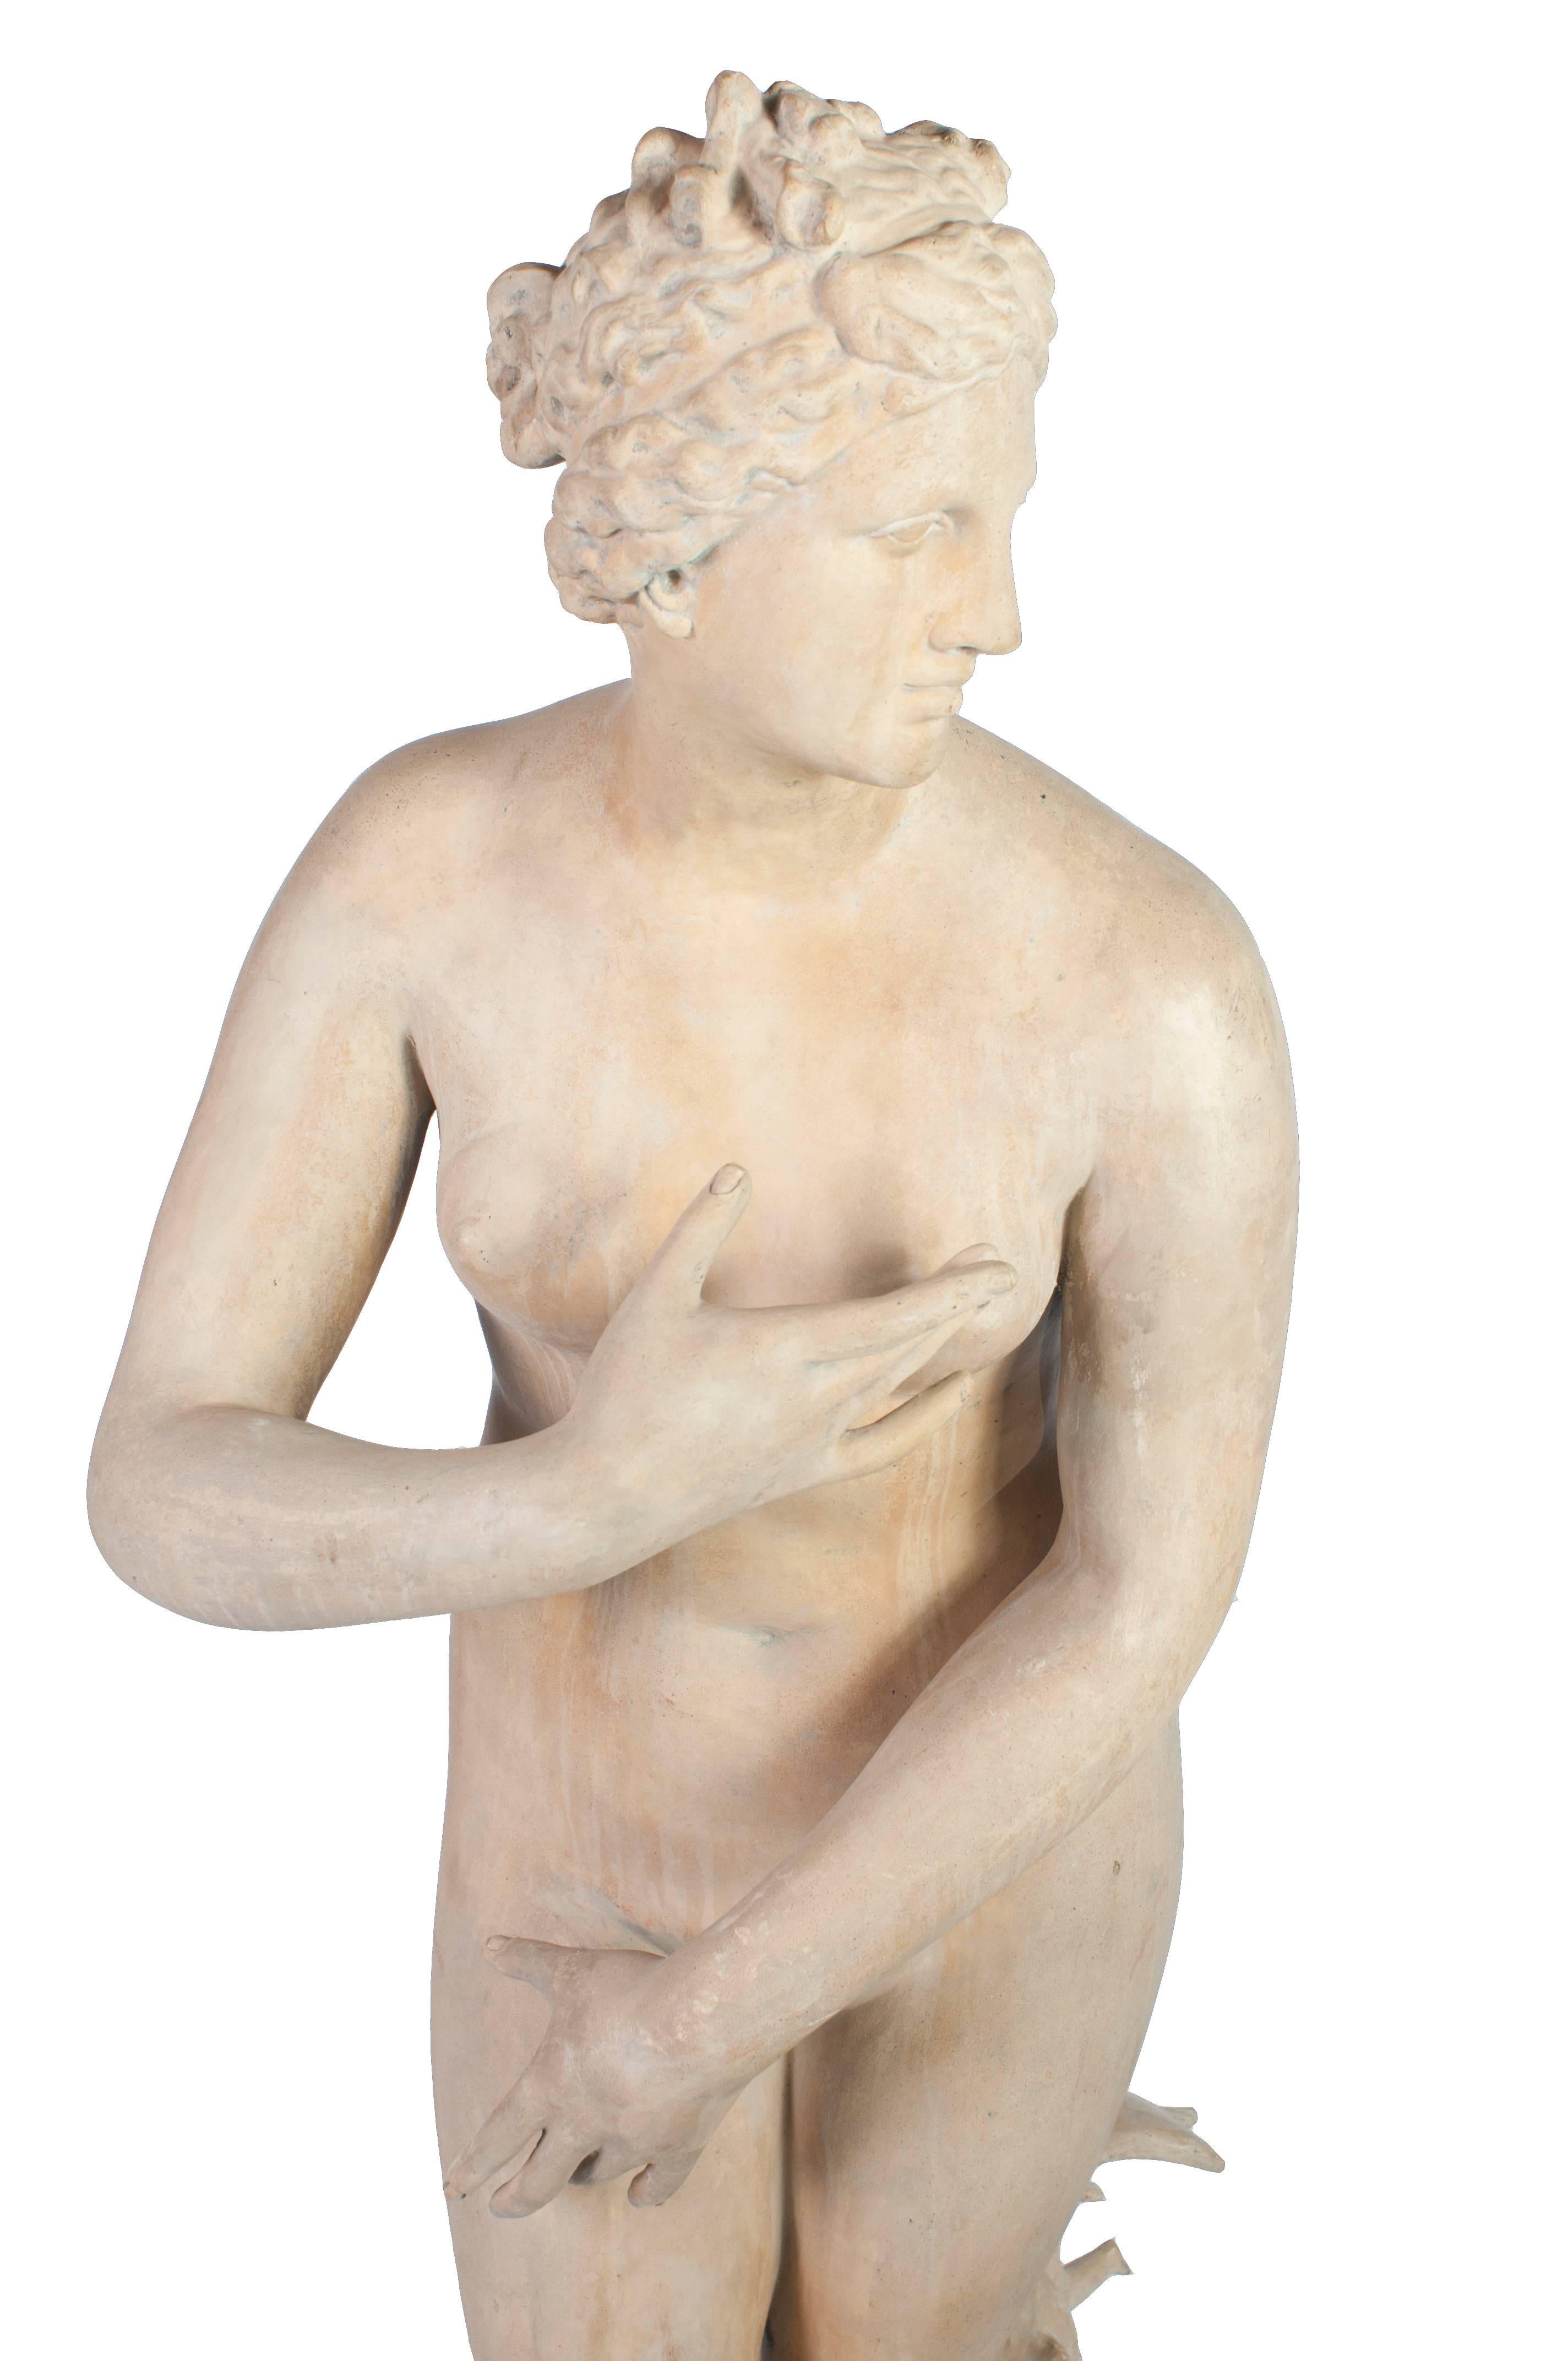 A white terracotta statue of Venus. This is a copy of the Venus statue in the museum in Florence, Italy.